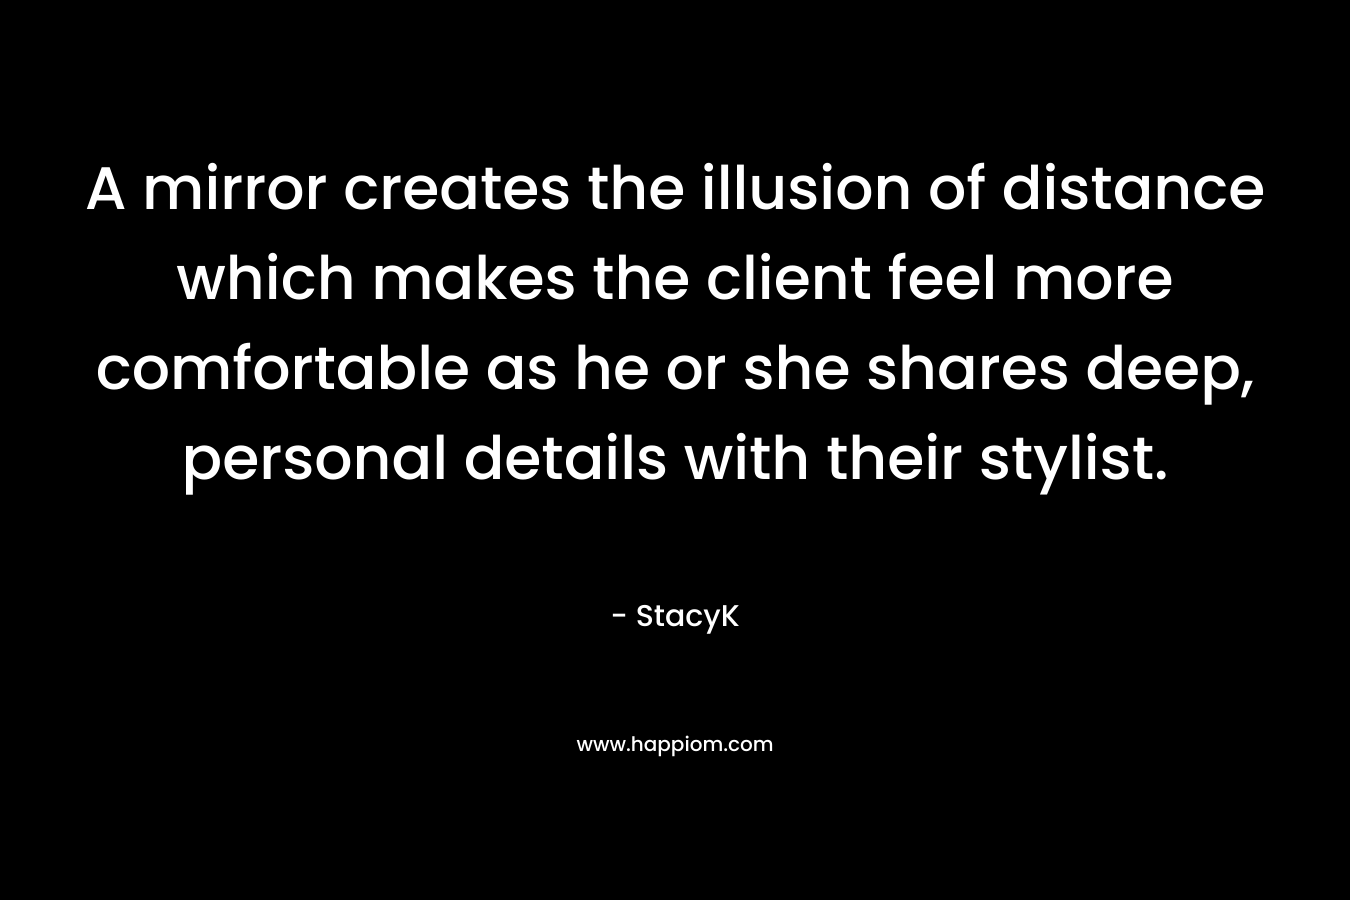 A mirror creates the illusion of distance which makes the client feel more comfortable as he or she shares deep, personal details with their stylist. – StacyK